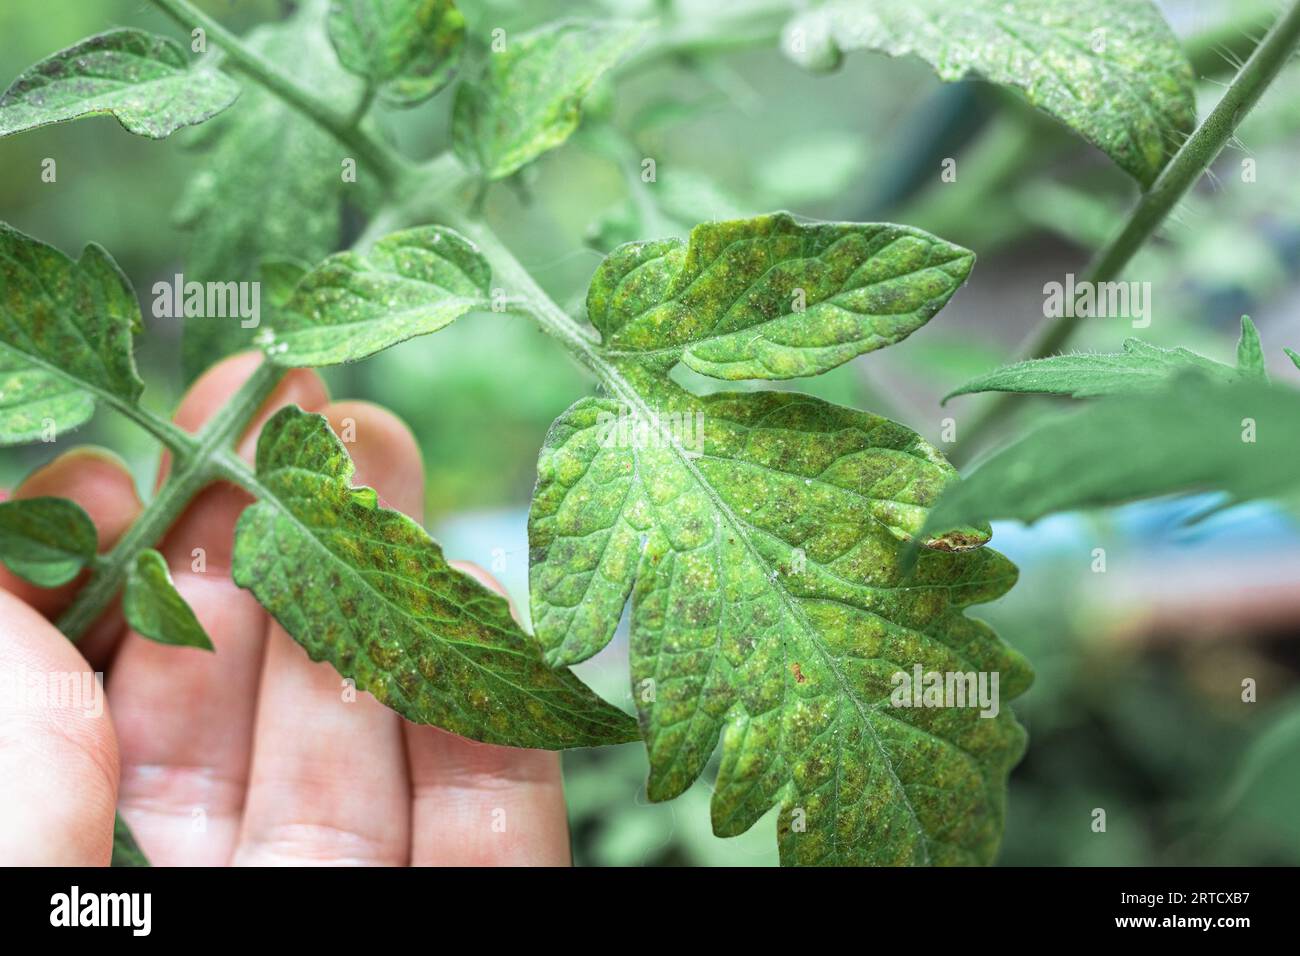 Growing tomatoes, care, treatment of plant diseases Stock Photo